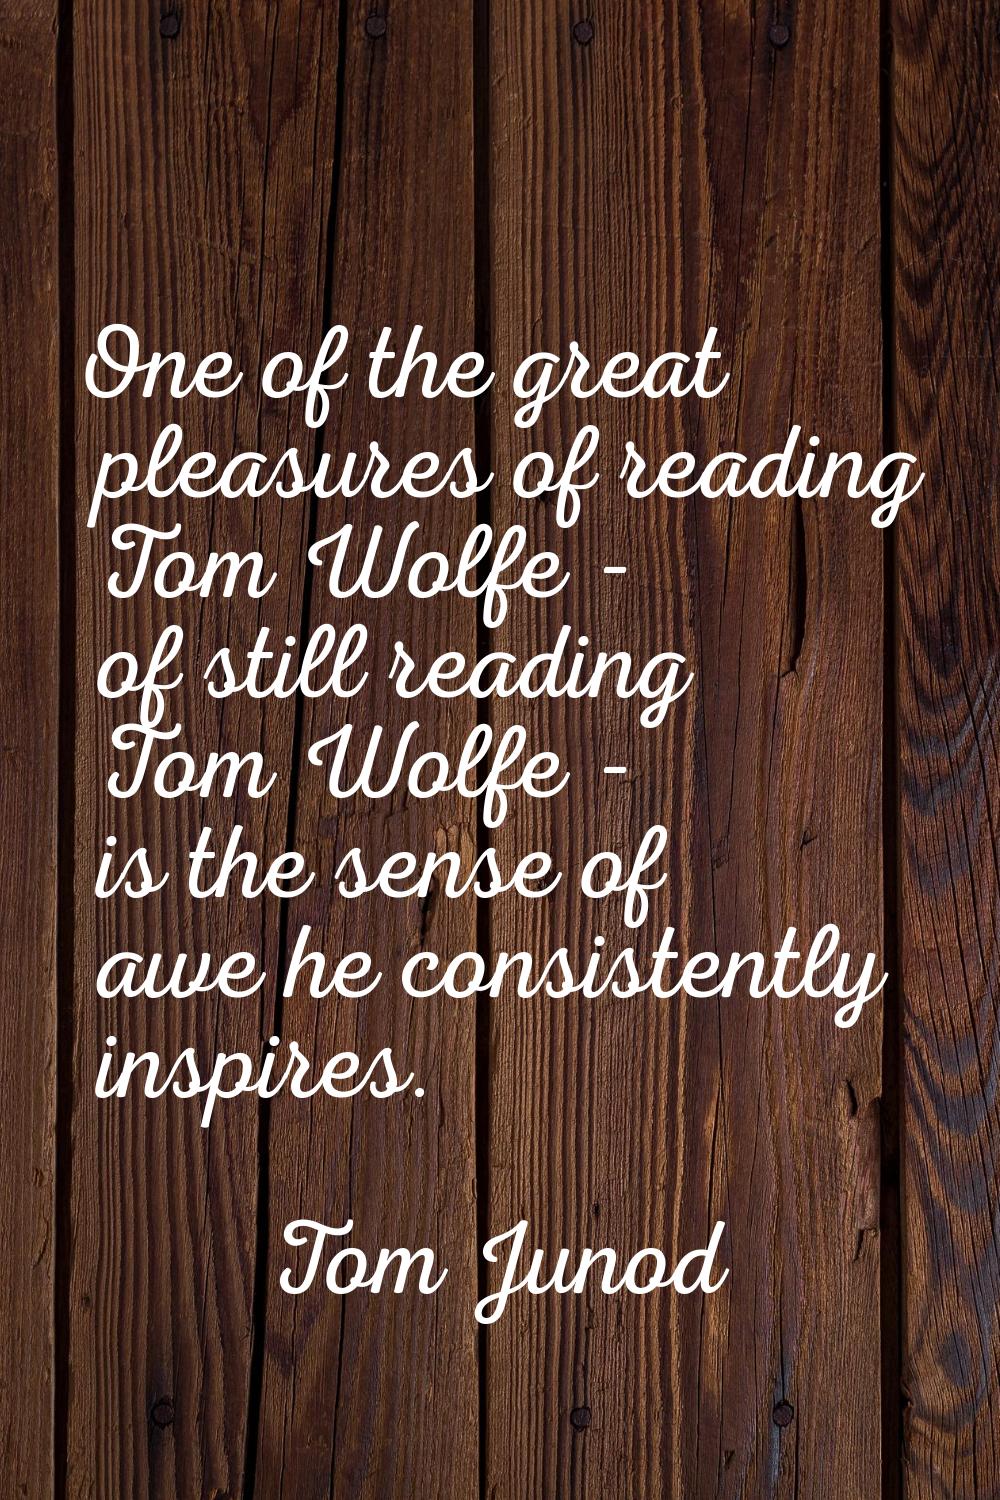 One of the great pleasures of reading Tom Wolfe - of still reading Tom Wolfe - is the sense of awe 